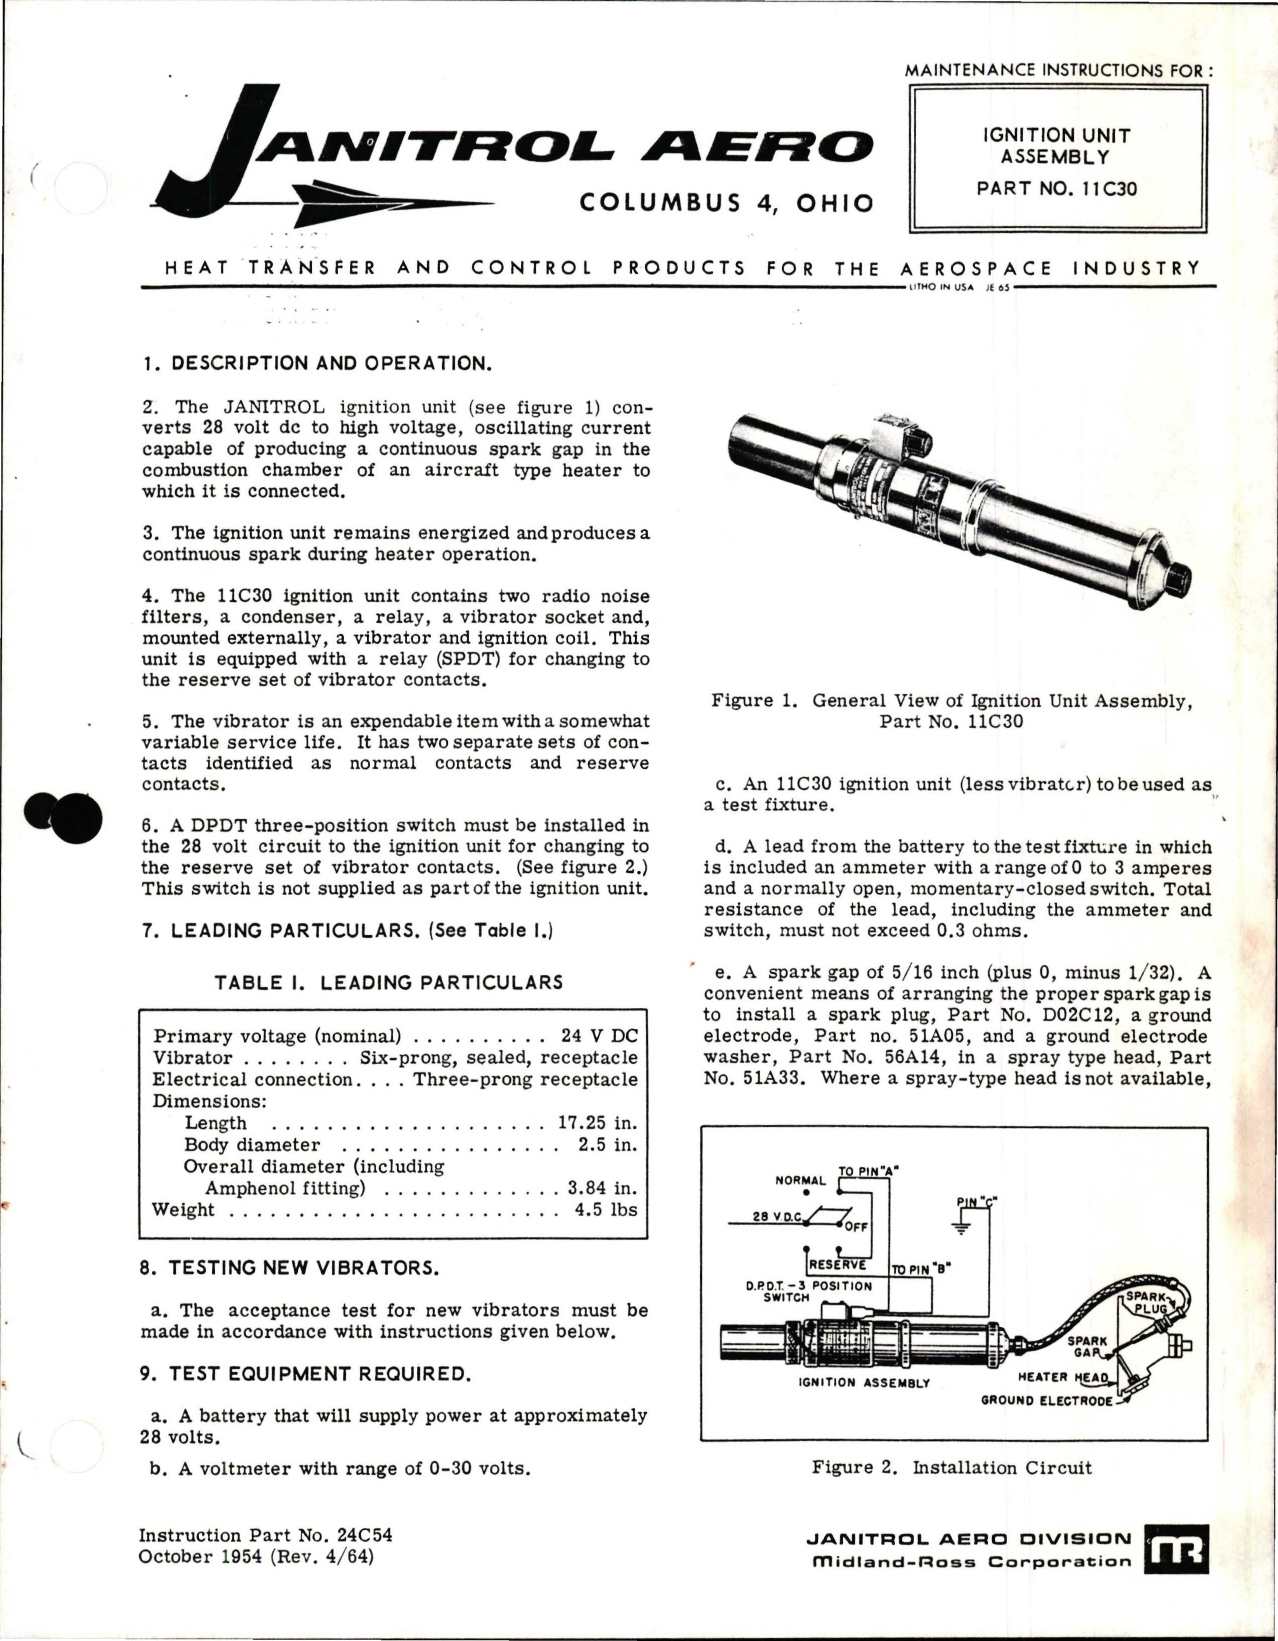 Sample page 1 from AirCorps Library document: Maintenance Instructions for Ignition Unit Assembly - Part 11C30